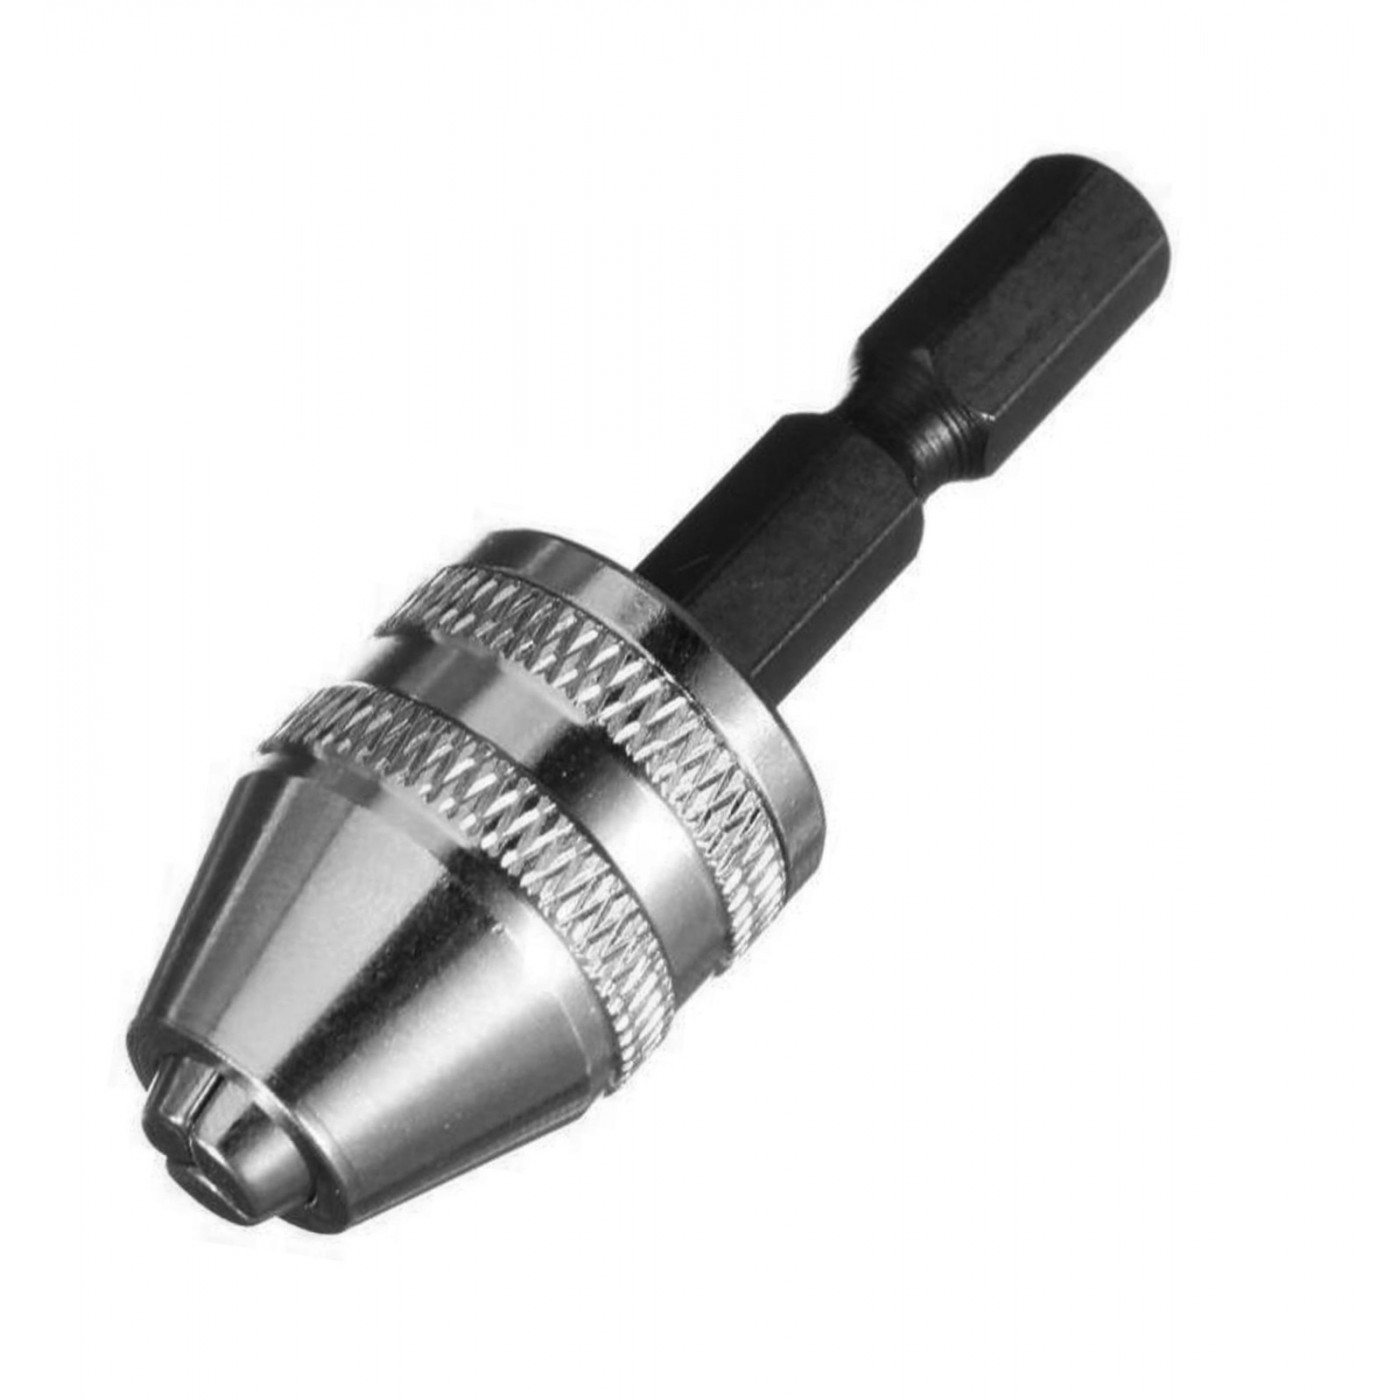 Quick-release chuck for drills (1-6 mm)